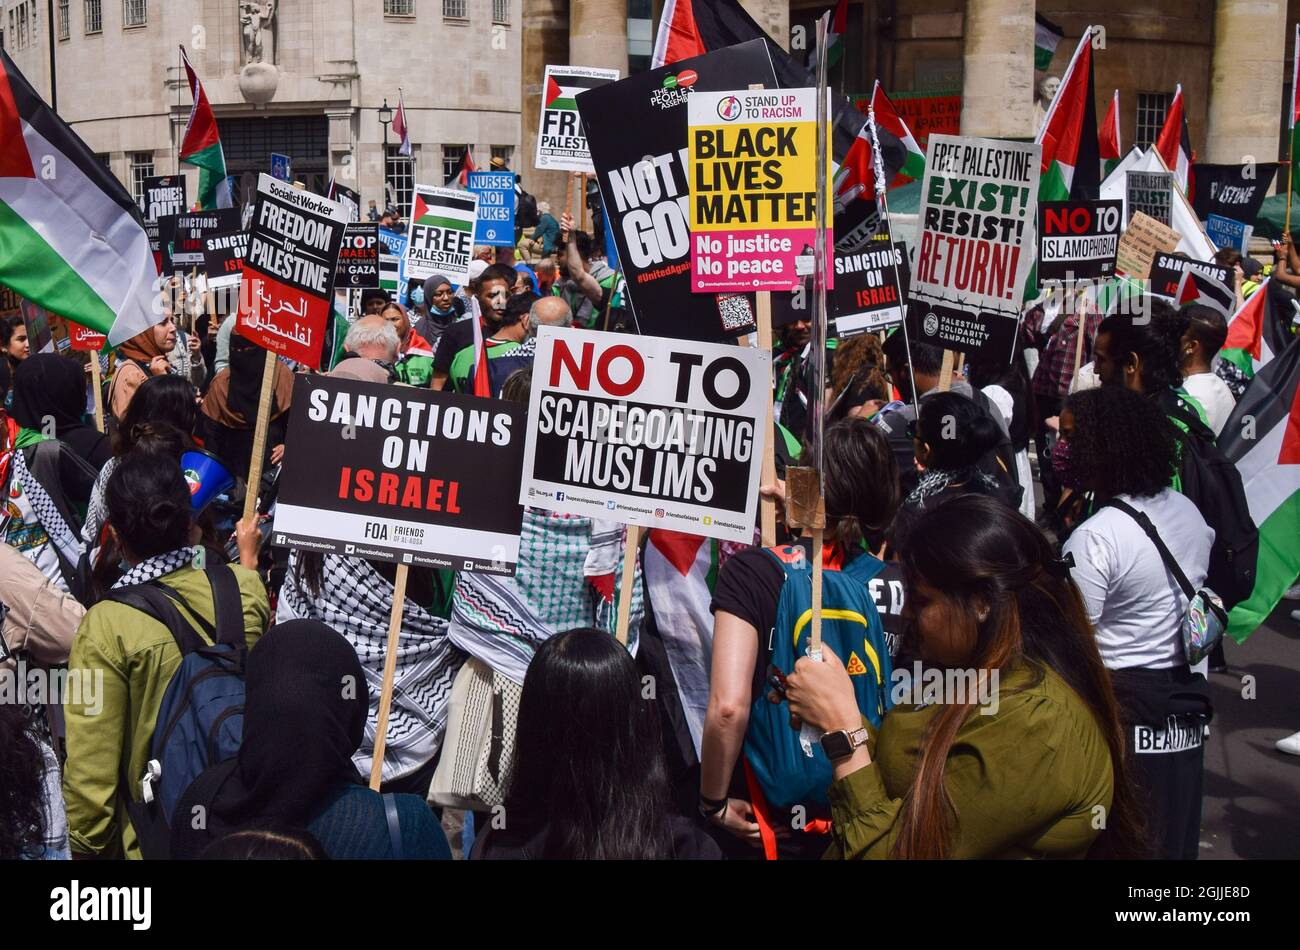 London, United Kingdom. 26th June 2021. A protester holds a 'No To Scapegoating Muslims' placard on Regent Street. Several protests took place in the capital, as pro-Palestine, Black Lives Matter, Kill The Bill, Extinction Rebellion, anti-Tory demonstrators, and various other groups marched through Central London. Stock Photo